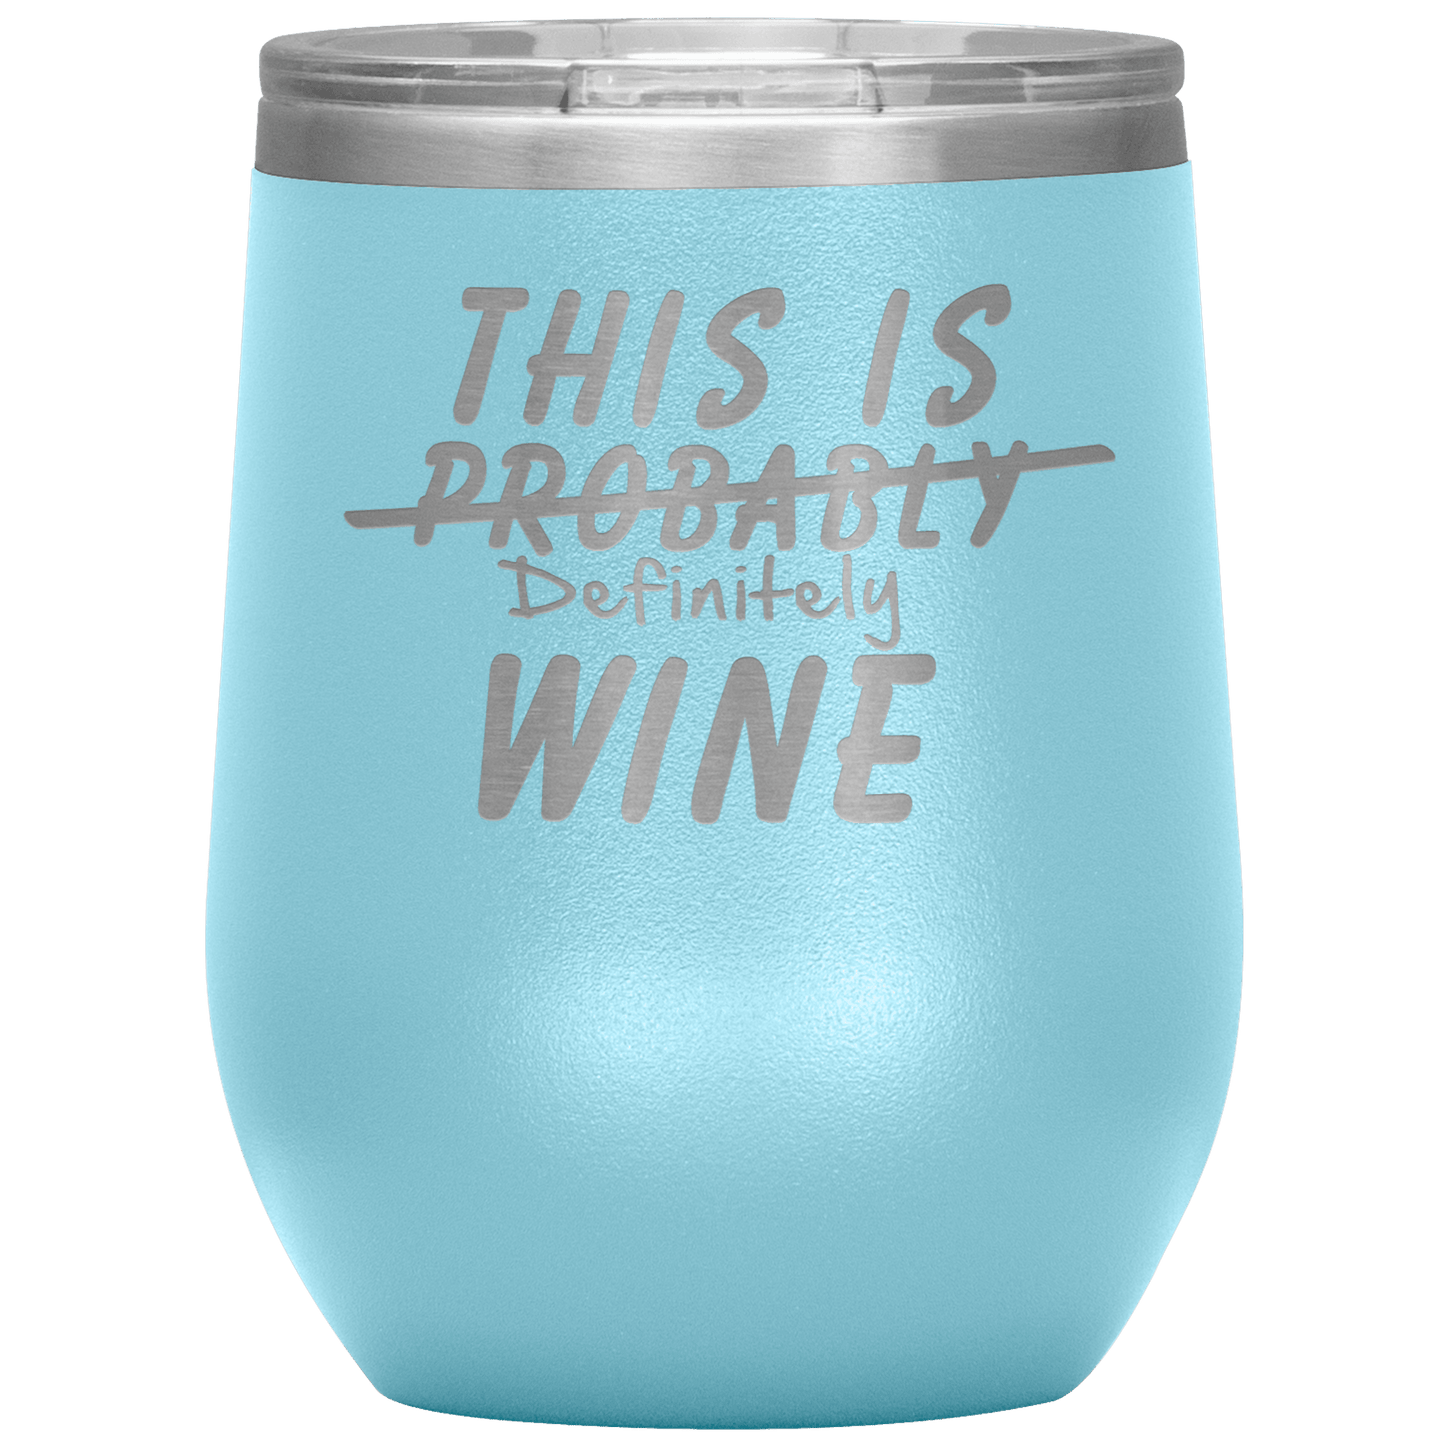 This Is Probably Wine Tumbler - Giftagic